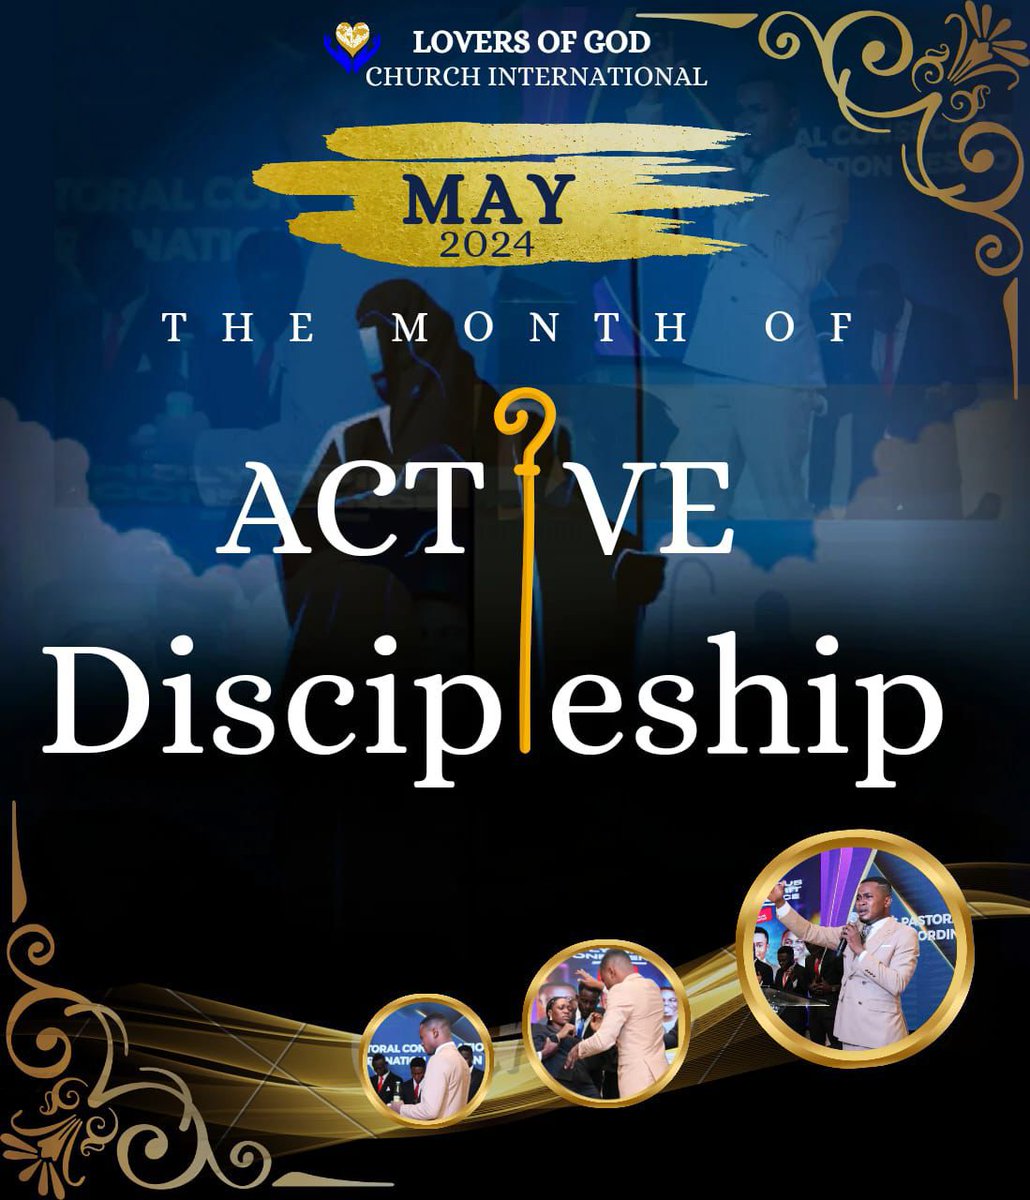 MAY 2024 our month of Active discipleship